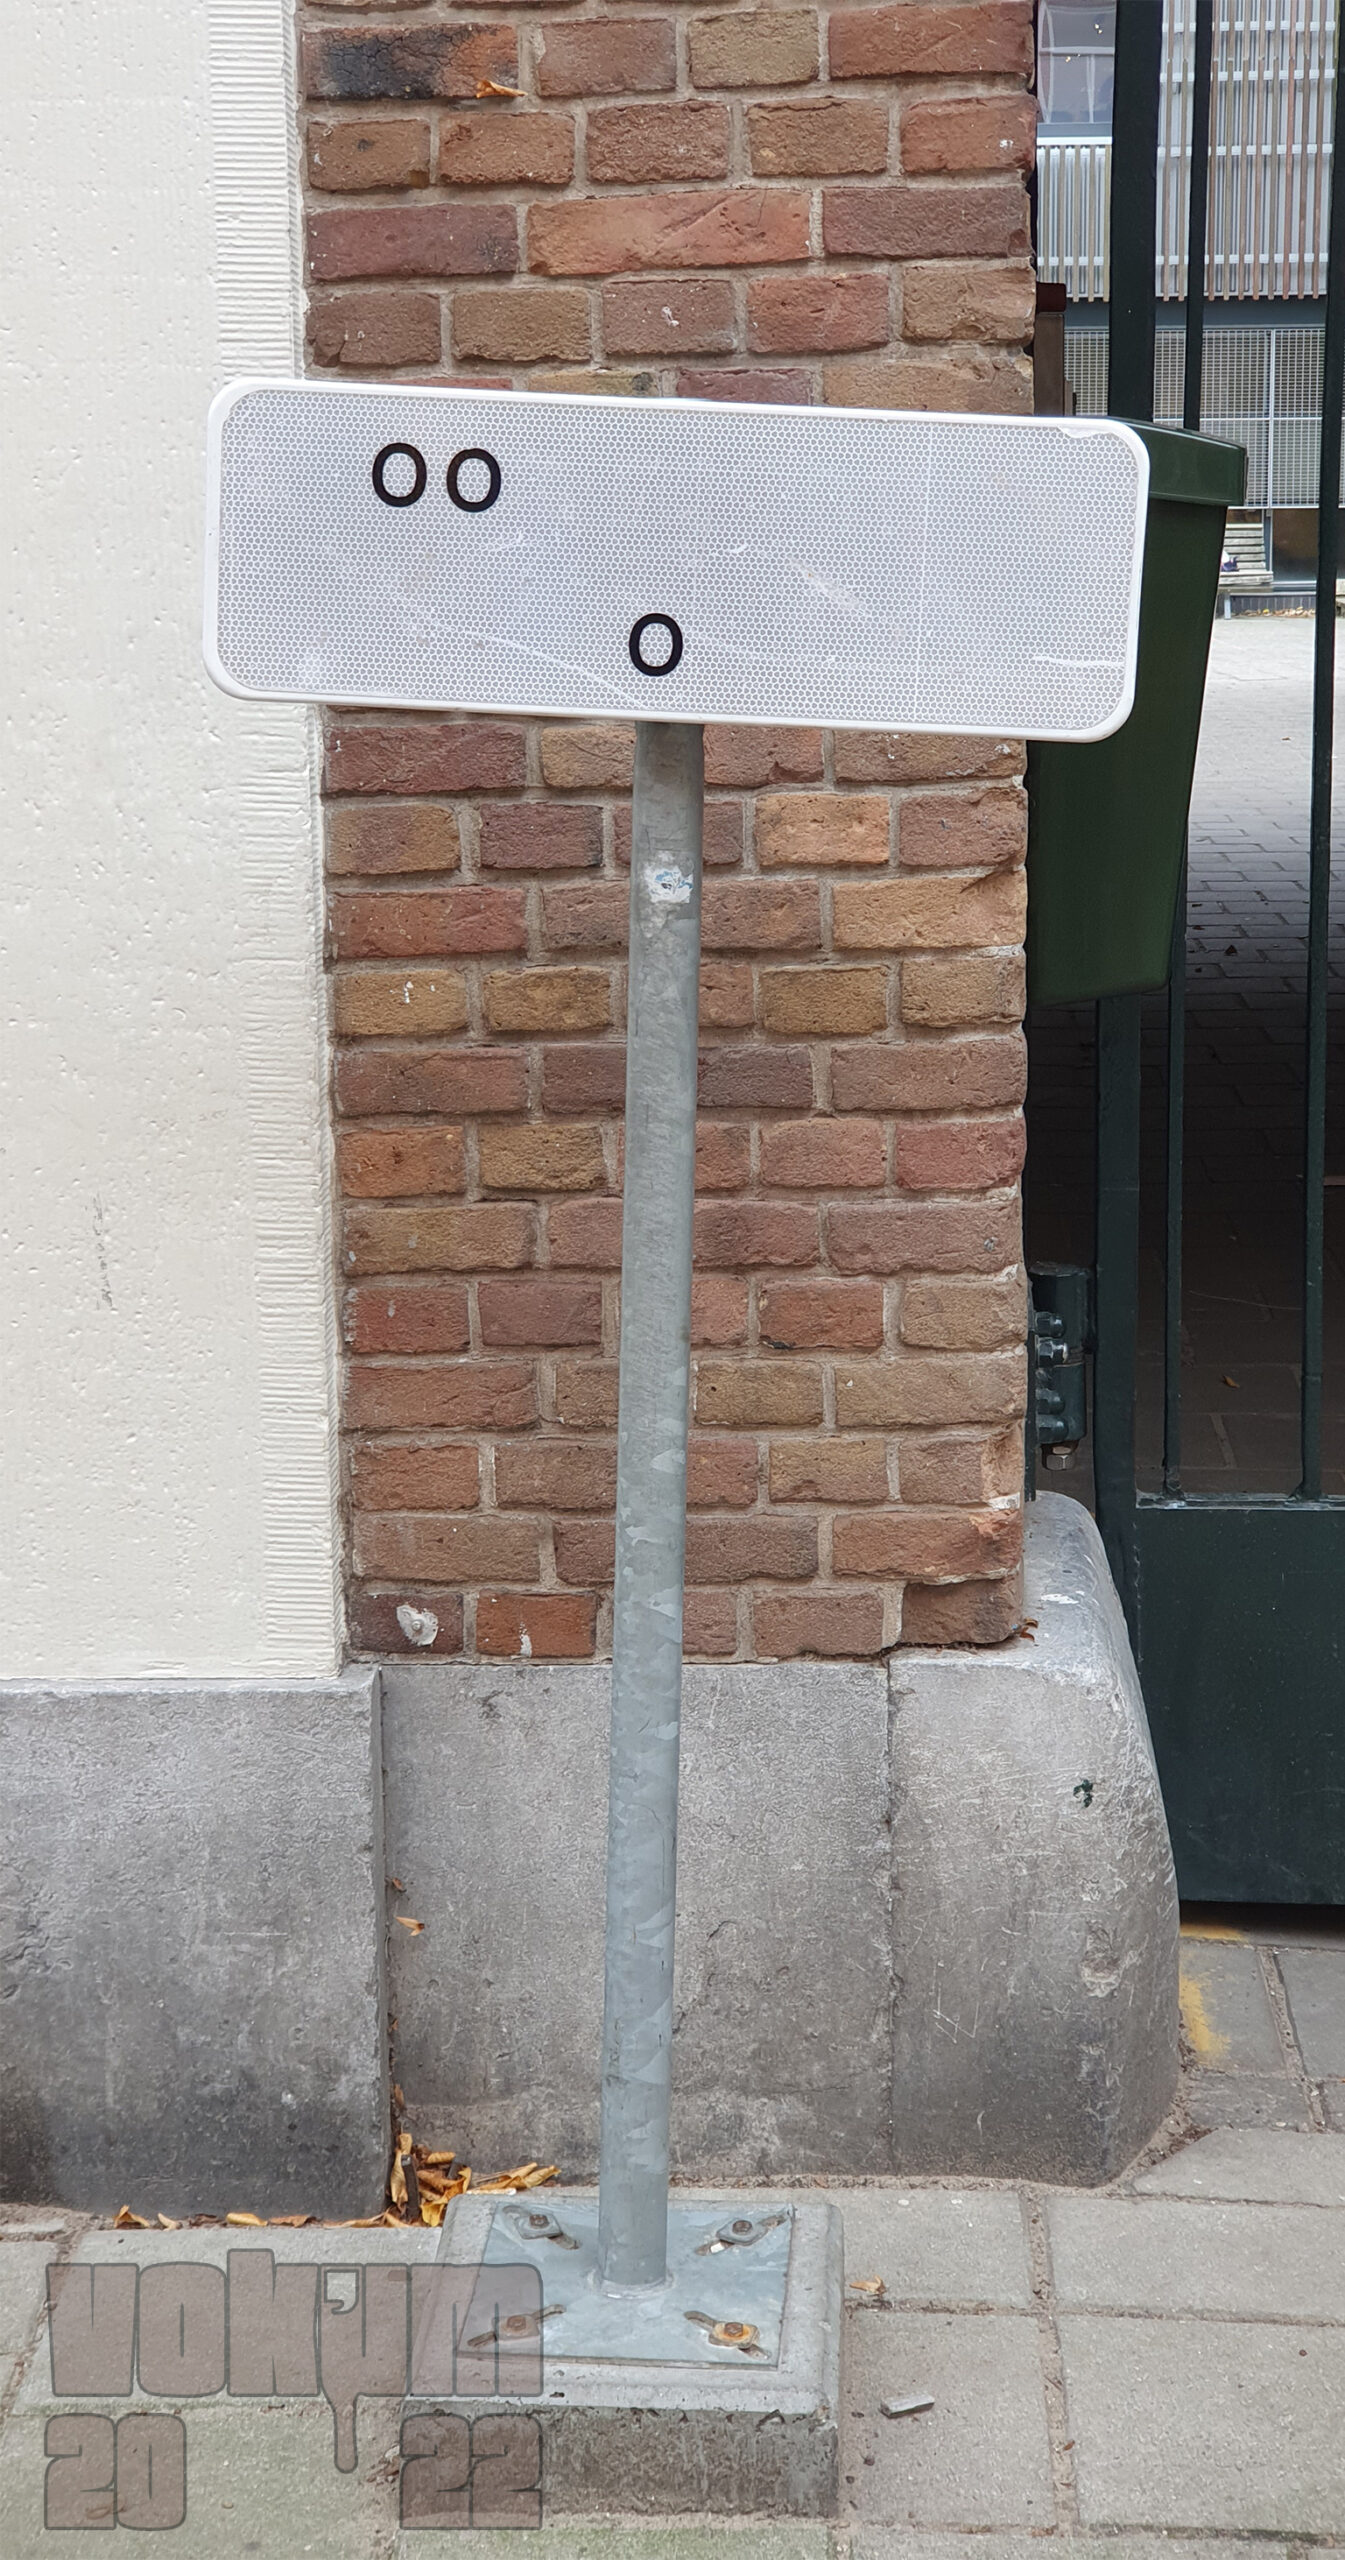 Traffic sign in front of an entrance with only a doubble o and a single o left.